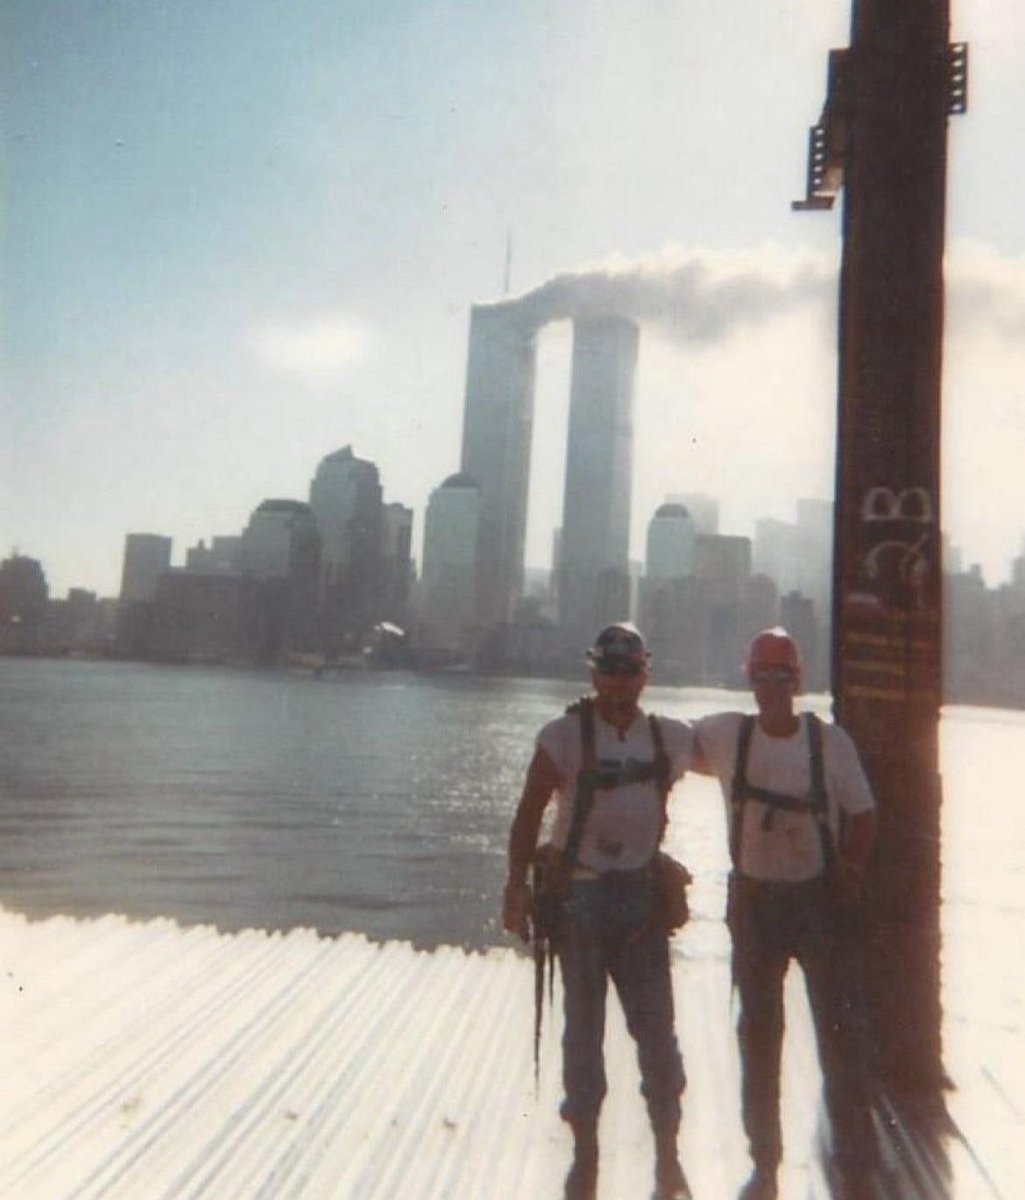 Two builders pose for a photo with the World Trade Center towers on 9/11.